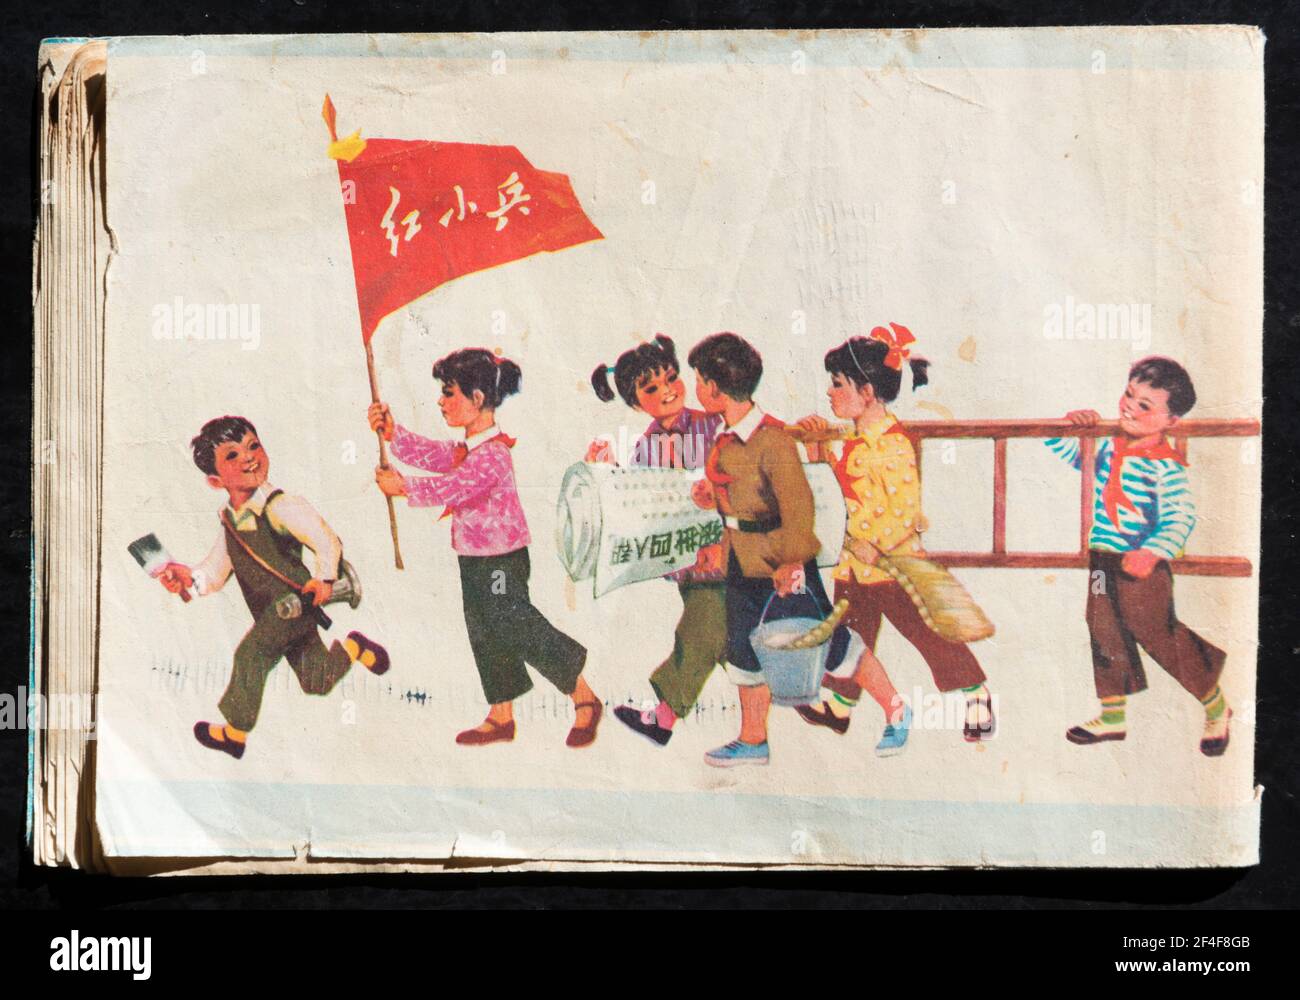 A painting on the back cover of a magazine in 1977, featuring a group of little red soldiers goes to post posters that criticize the Gang of Four. Stock Photo